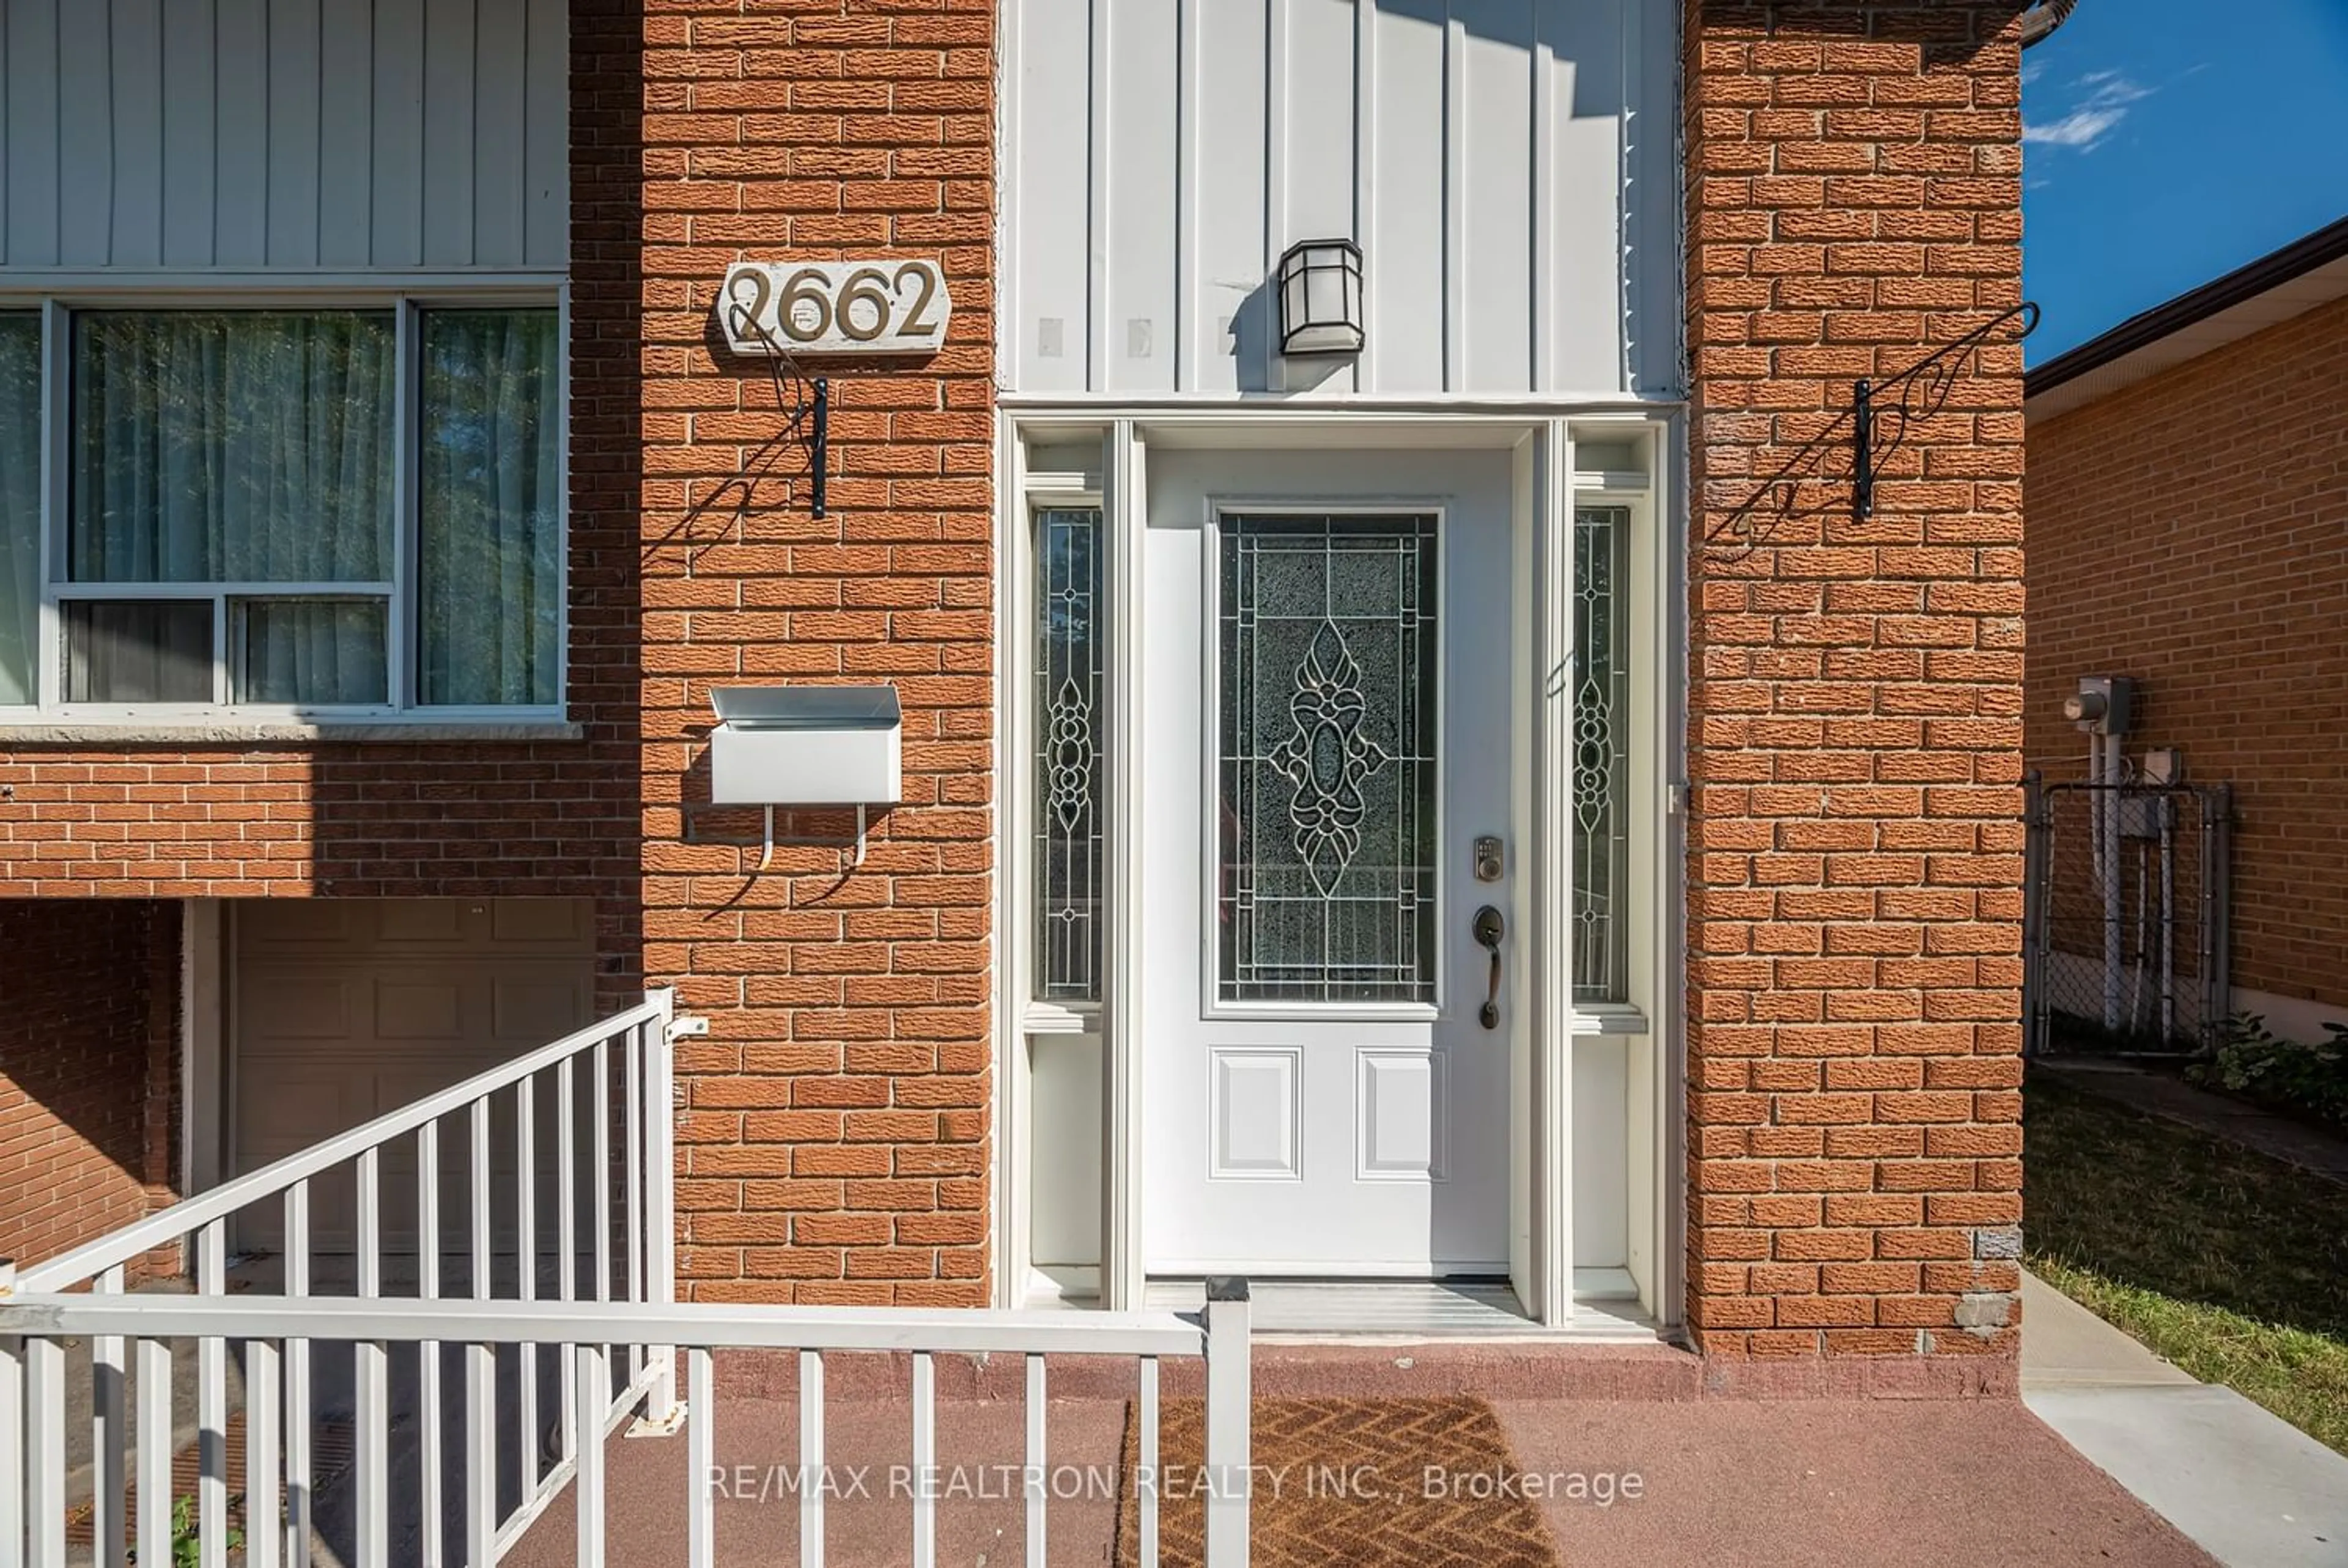 A pic from exterior of the house or condo for 2662 Hortense Rd, Mississauga Ontario L5L 1V7